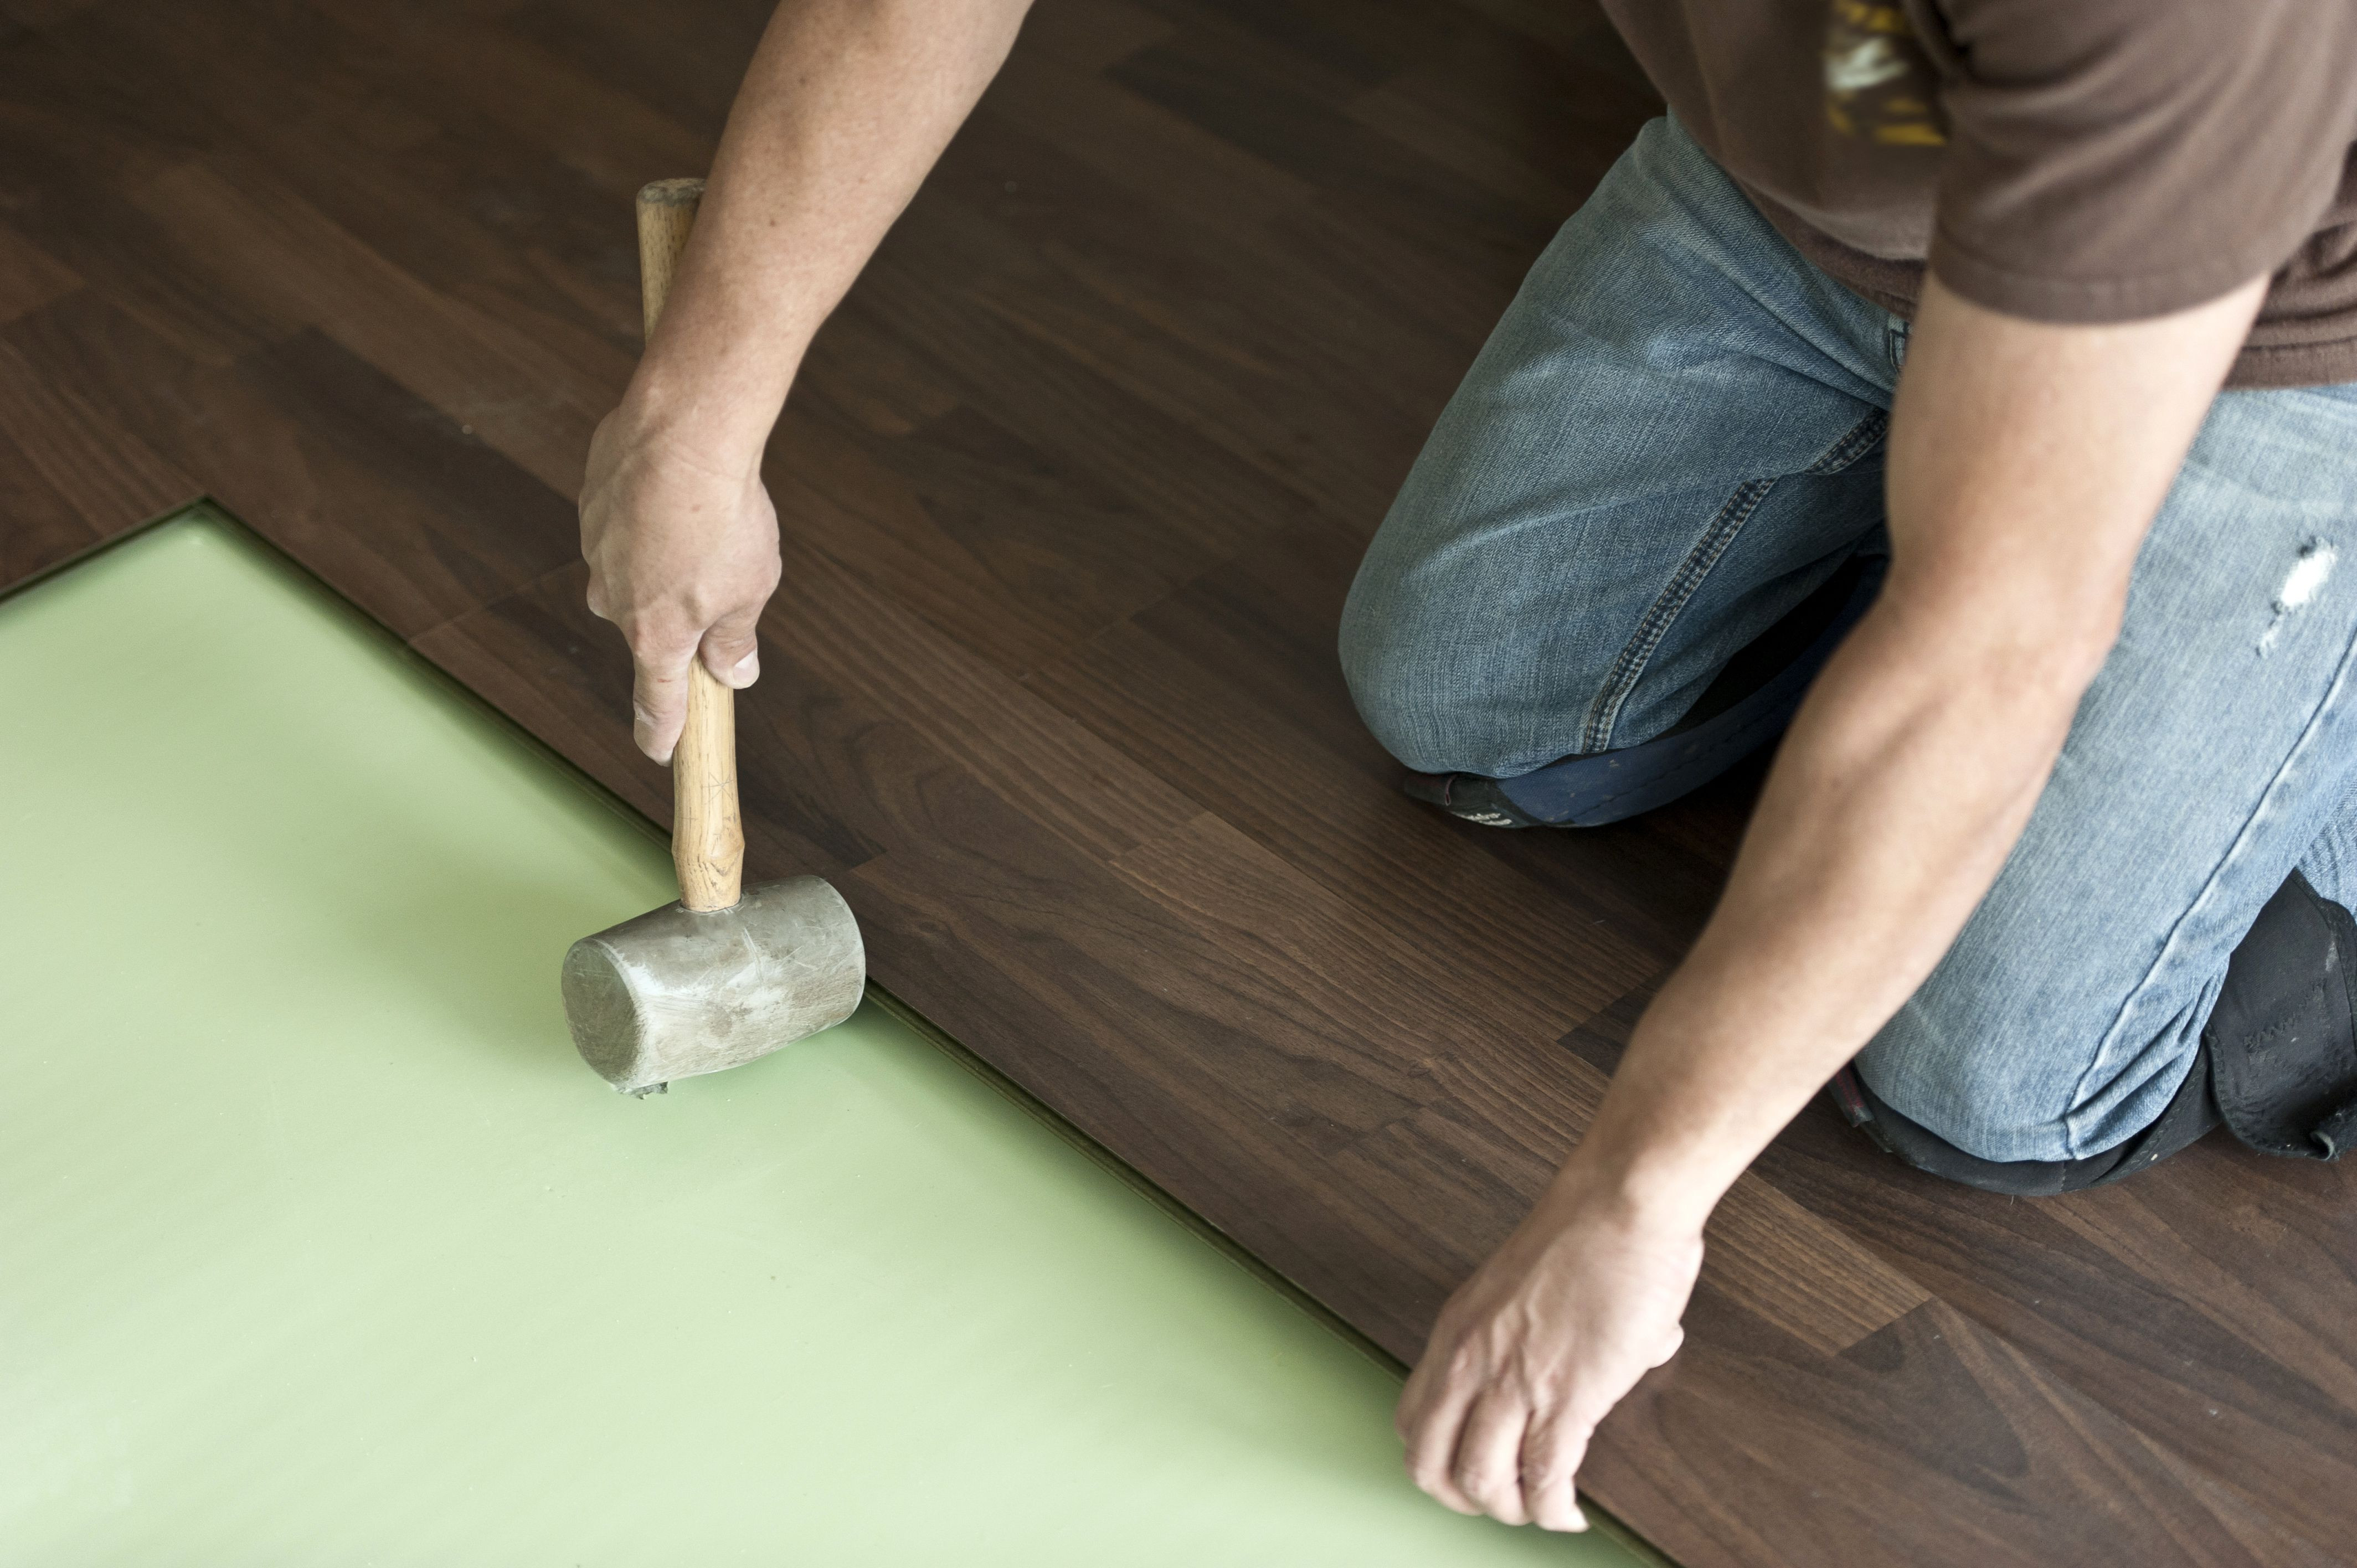 diy laminate hardwood flooring installation of can a foam pad be use under solid hardwood flooring regarding installing hardwood floor 155149312 57e967d45f9b586c35ade84a